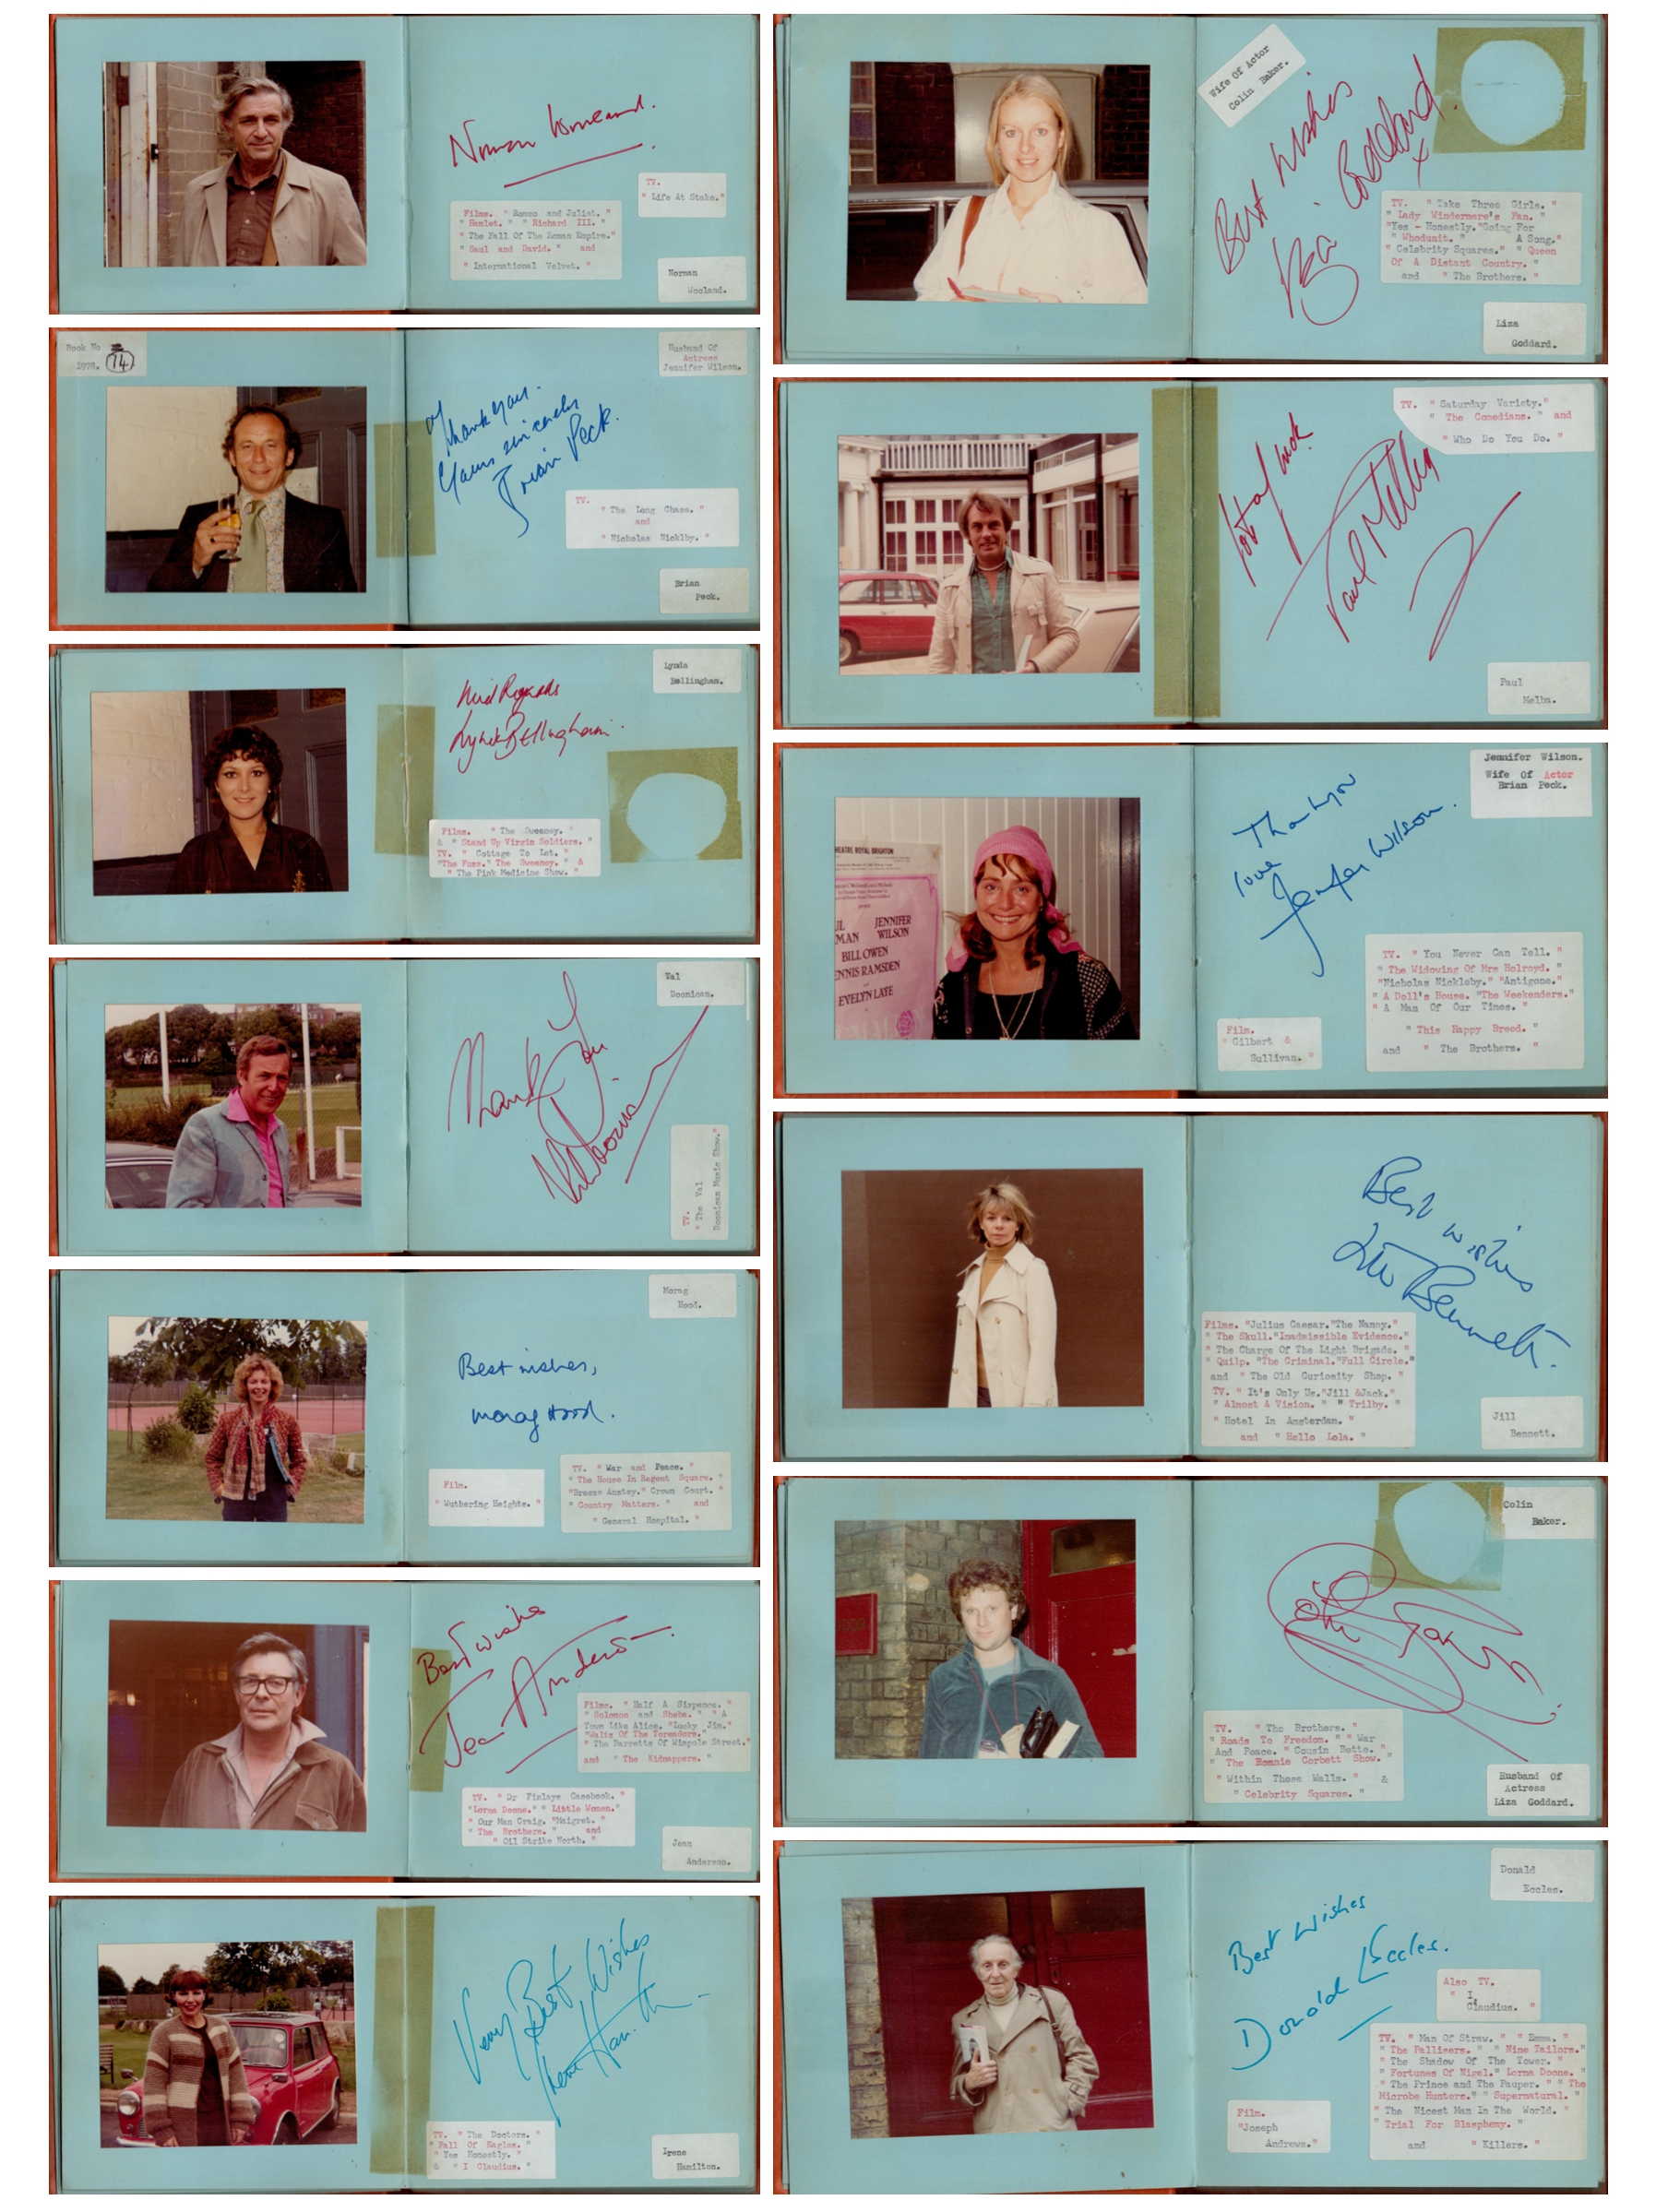 Entertainment Autograph book with photos and signatures such as Brian Peck, Jennifer Wilson, Jean